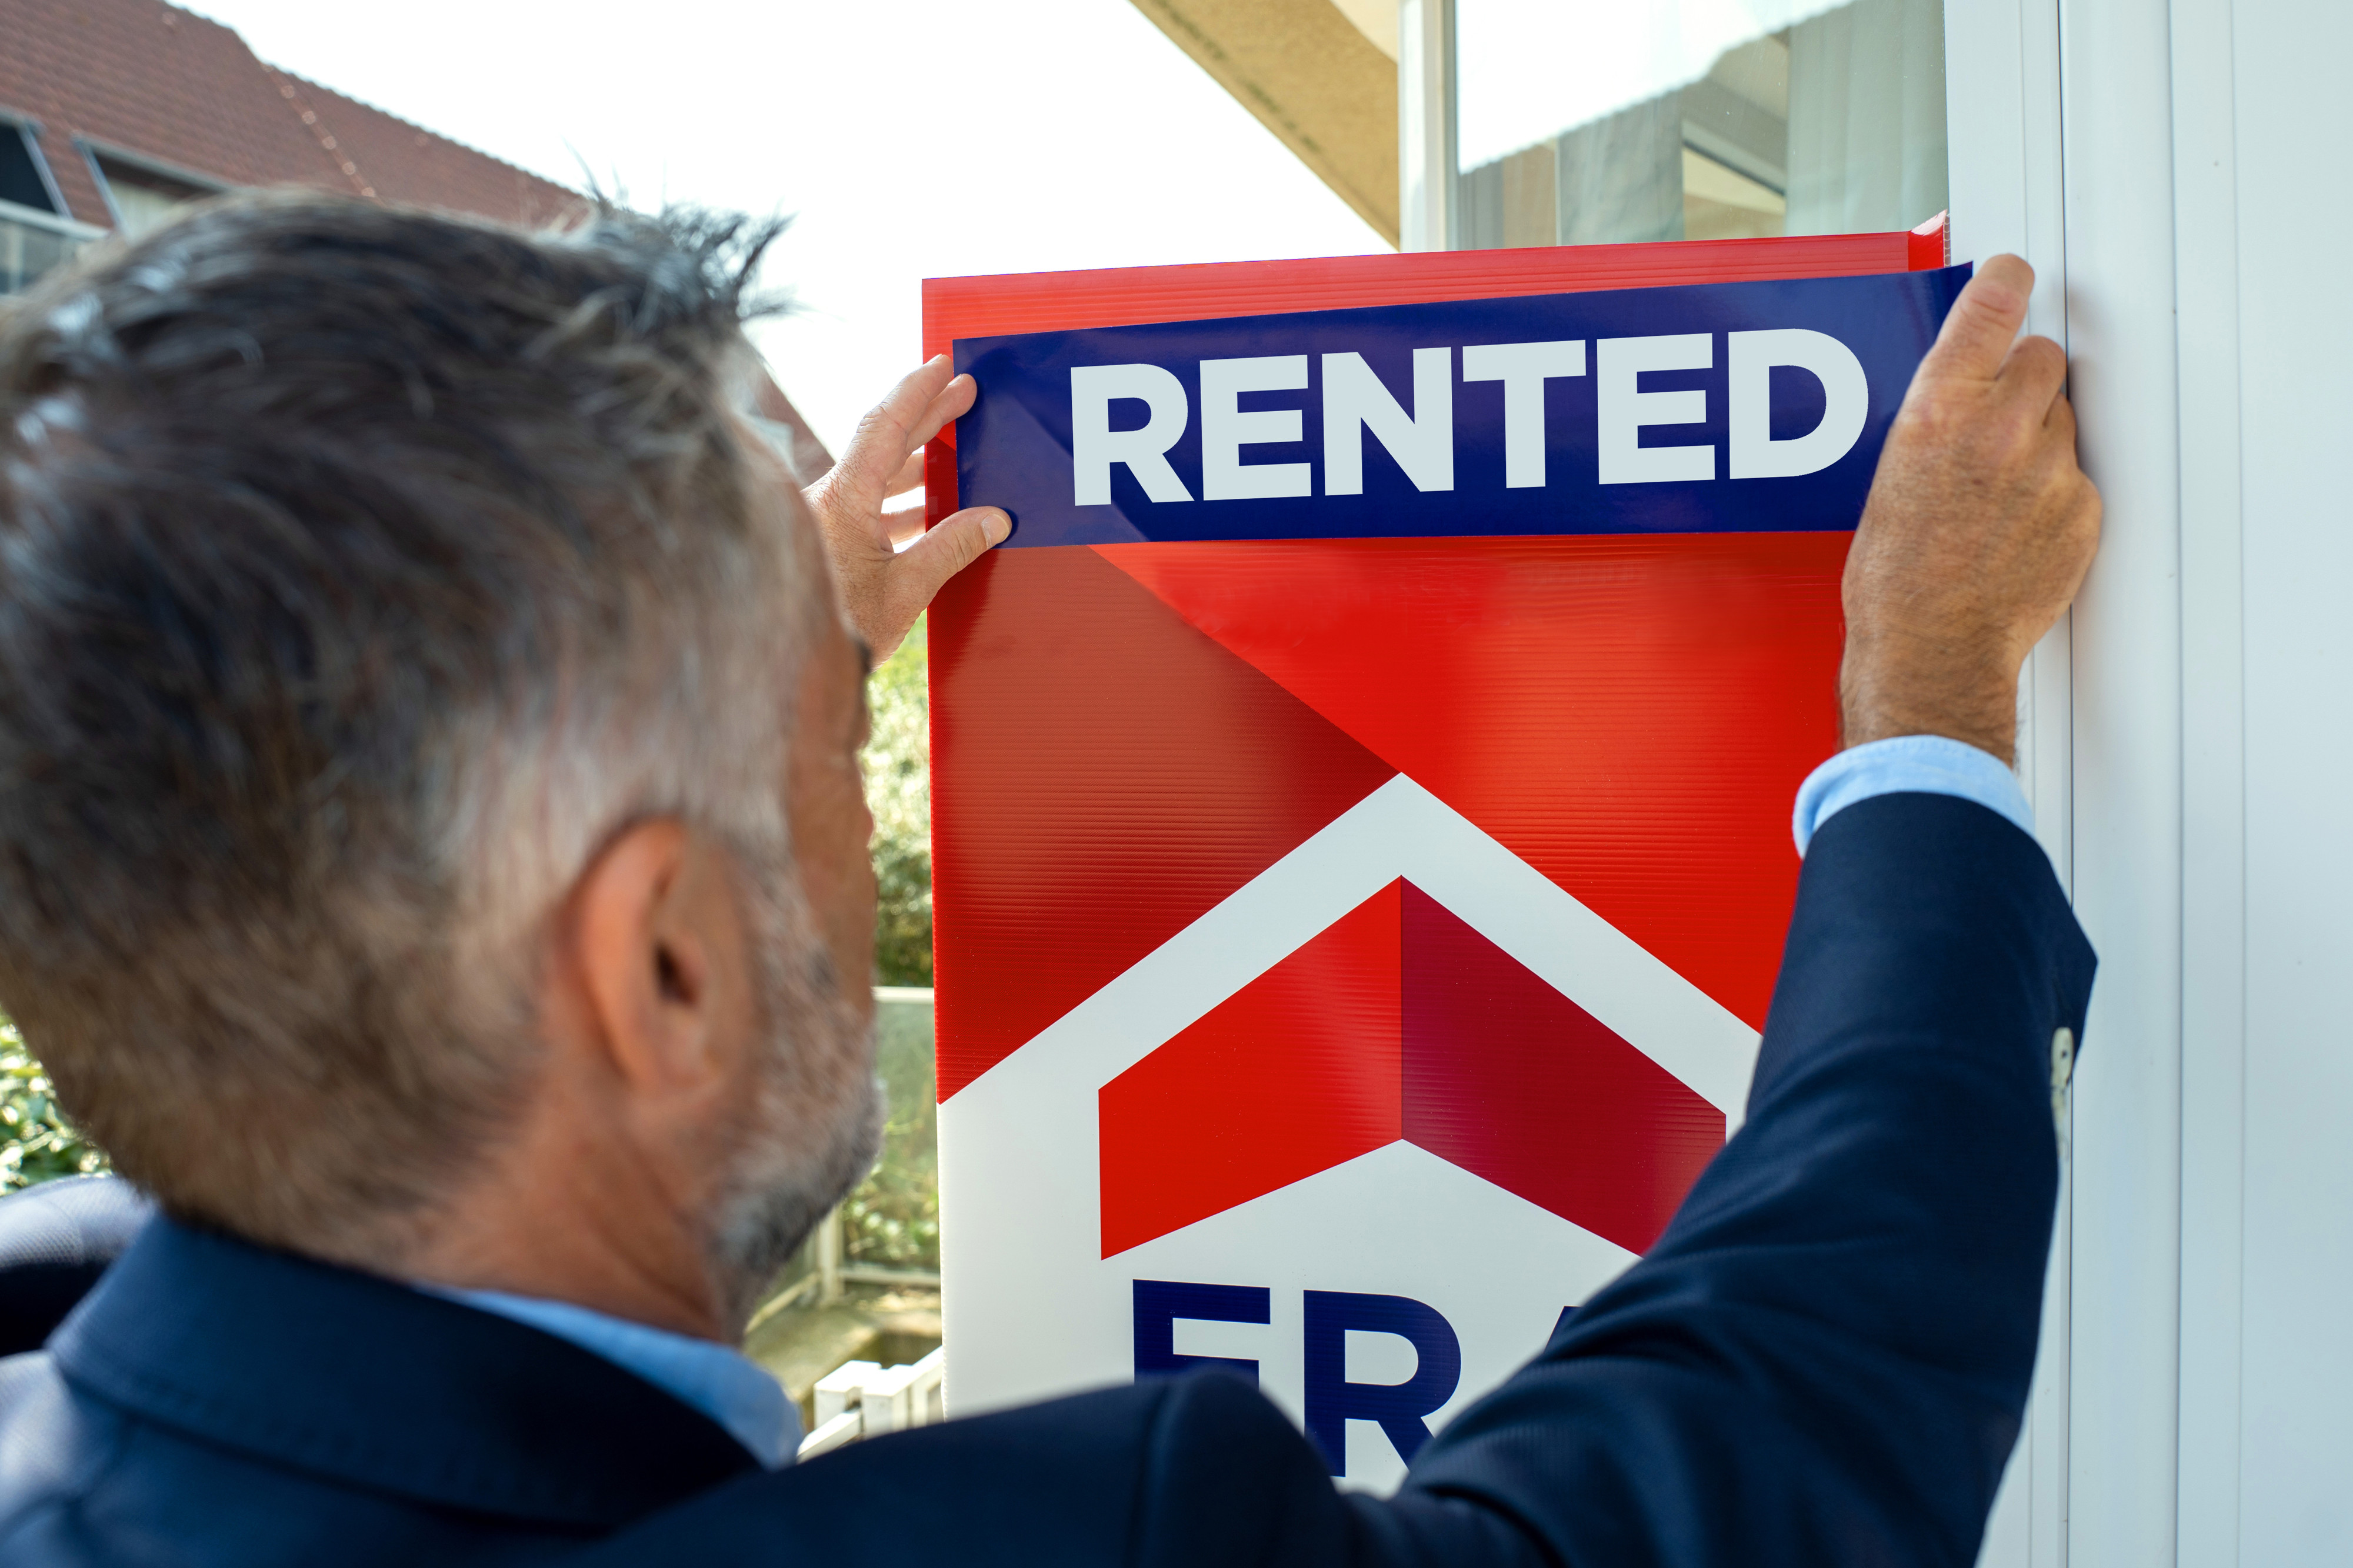 The real estate agent puts rented on the sign